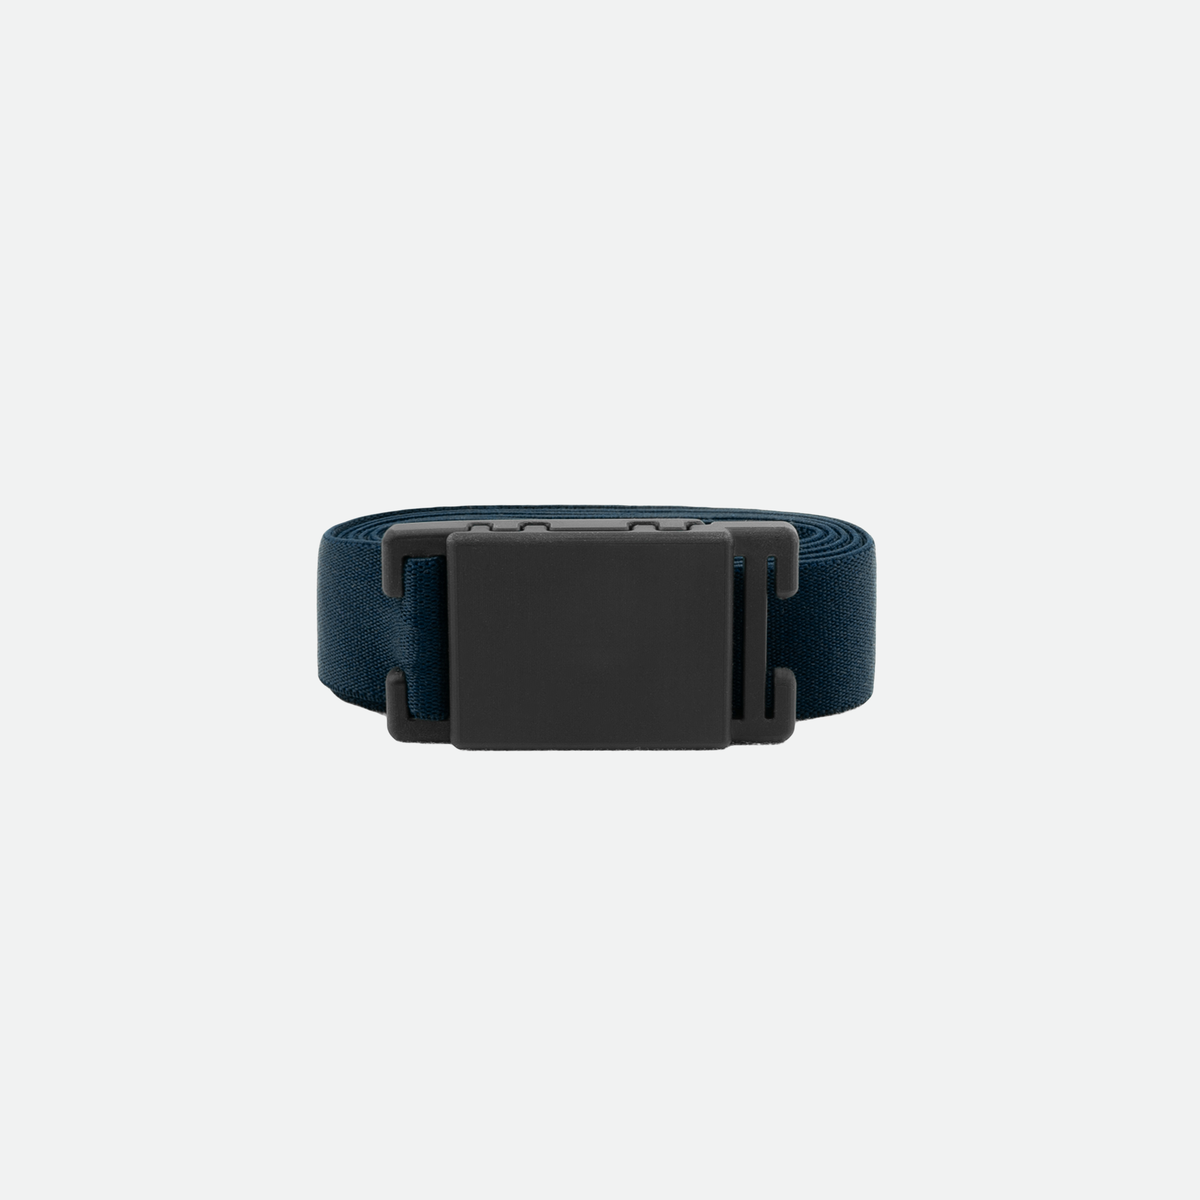 STRETCH BELT - black ONE SIZE - Elasticated belt with magnetic